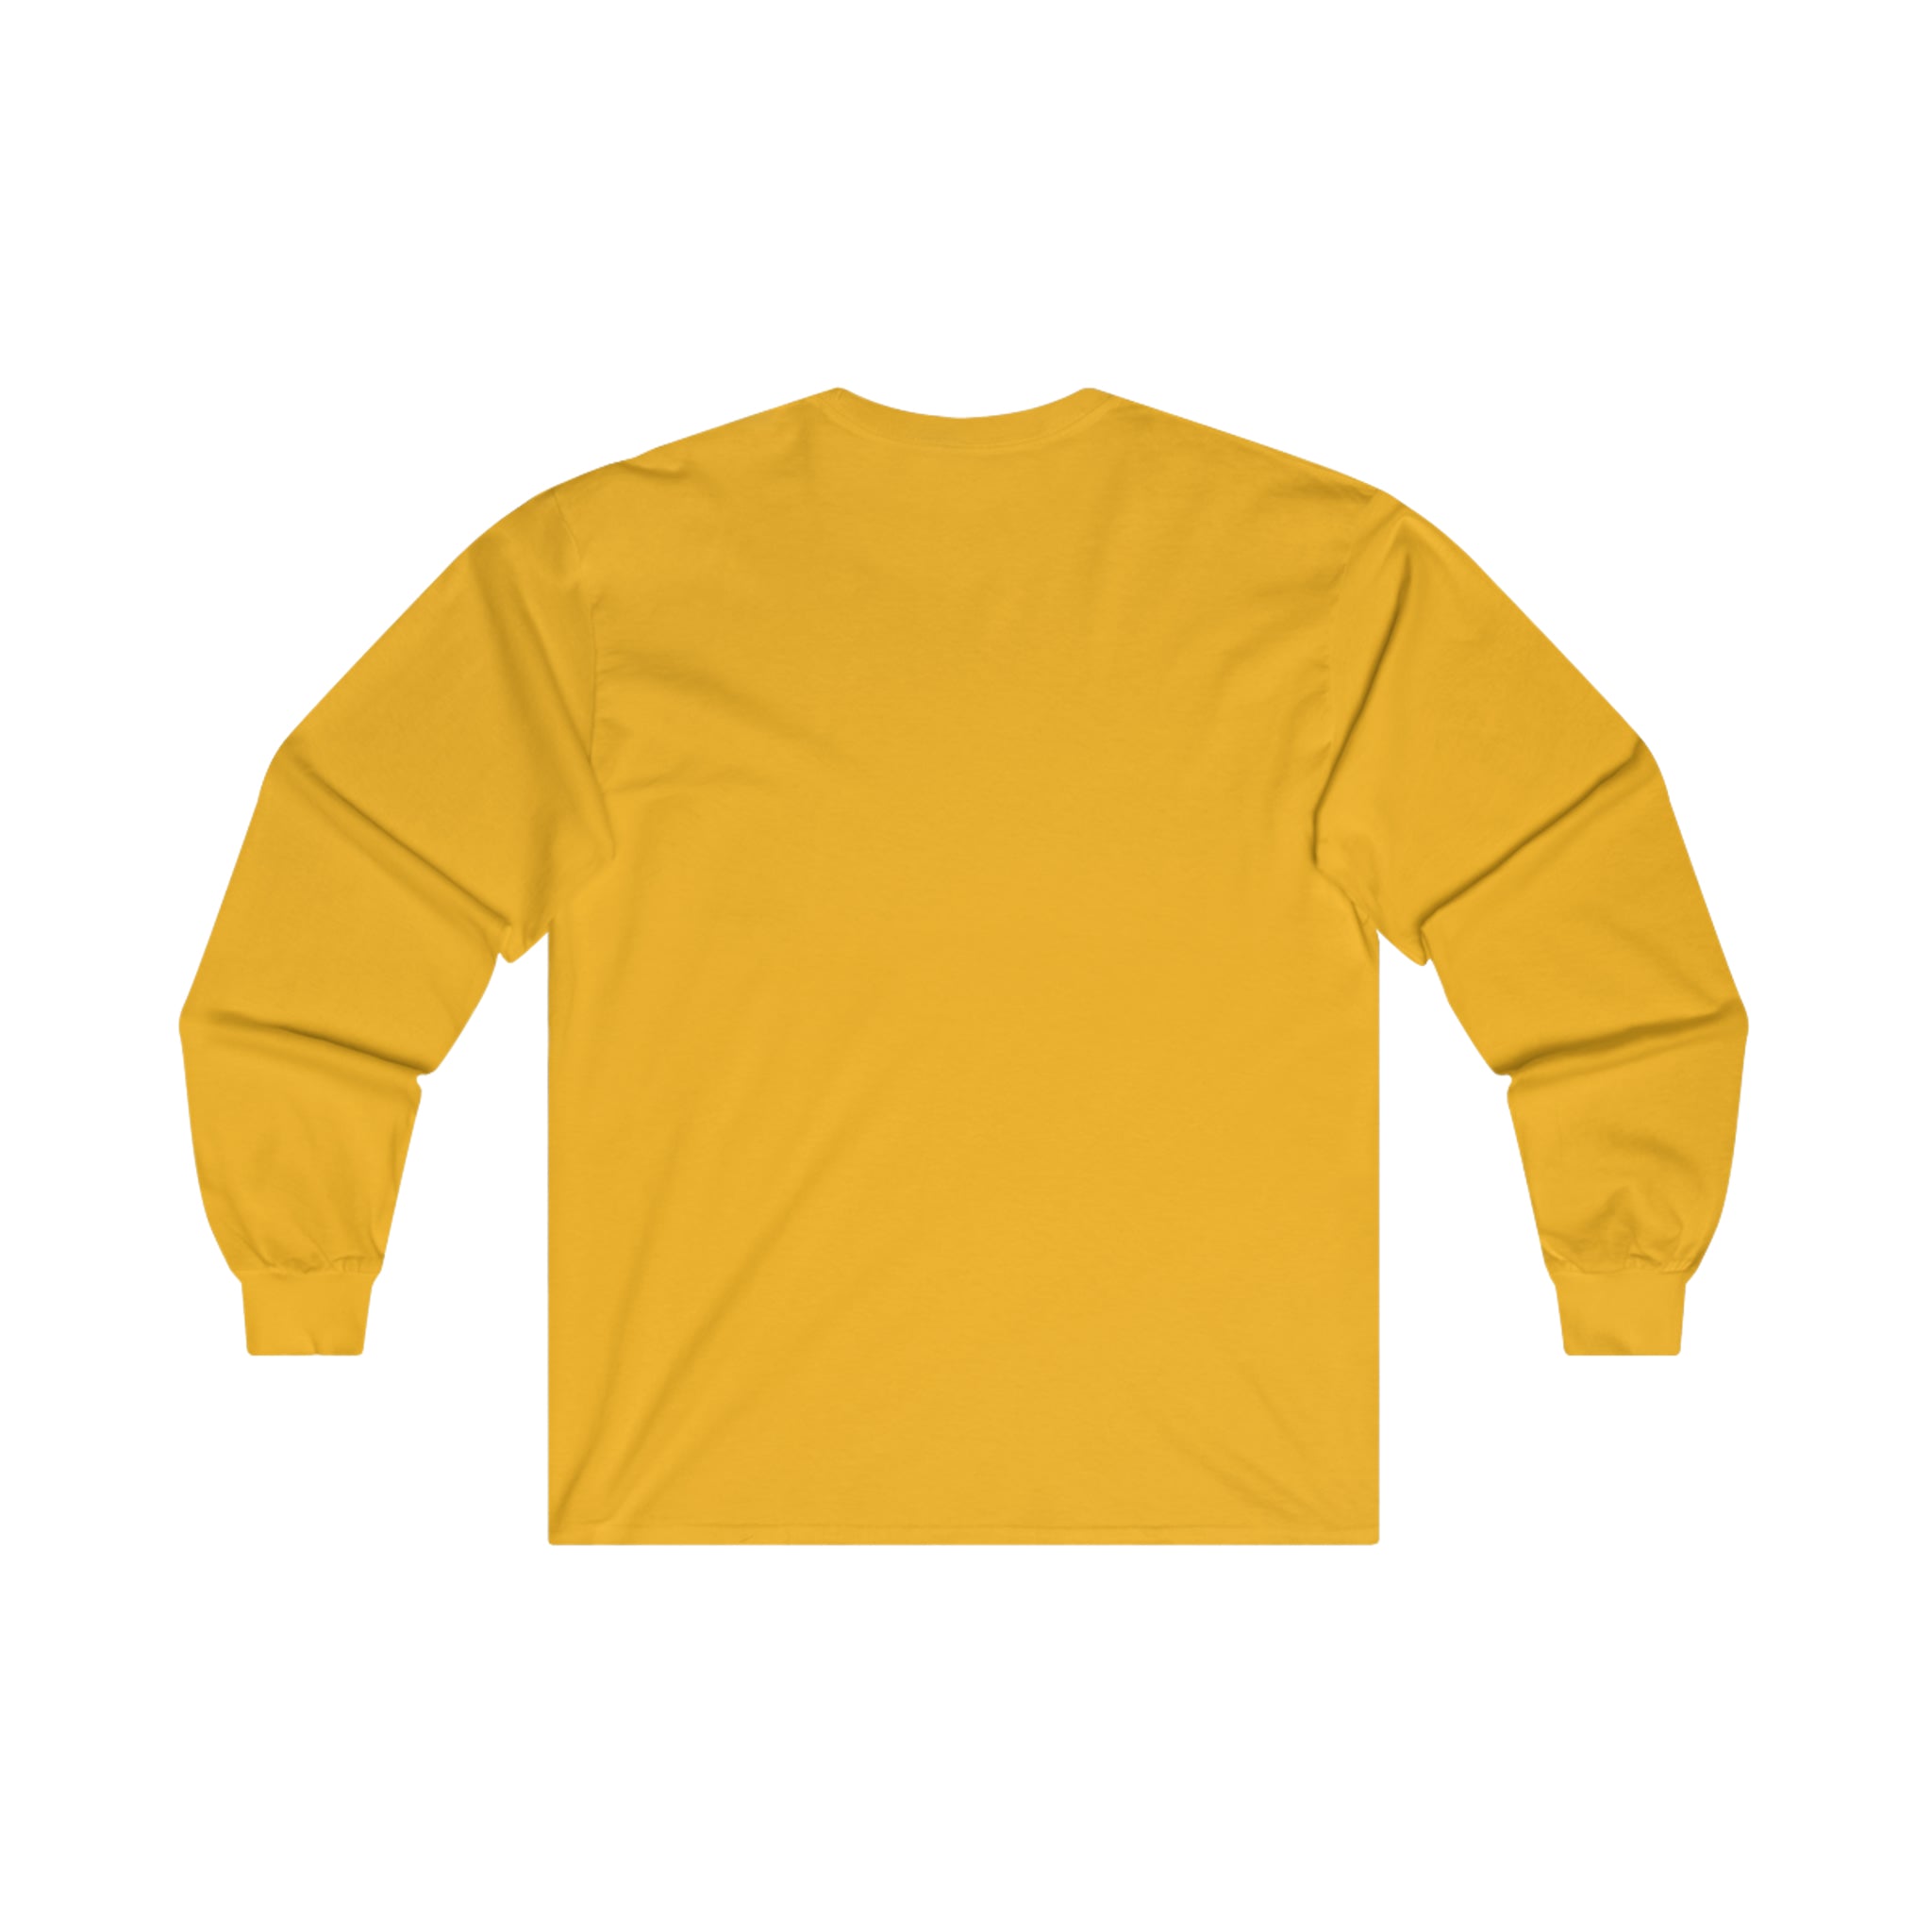 Future Vintage “Classic” Long Sleeves